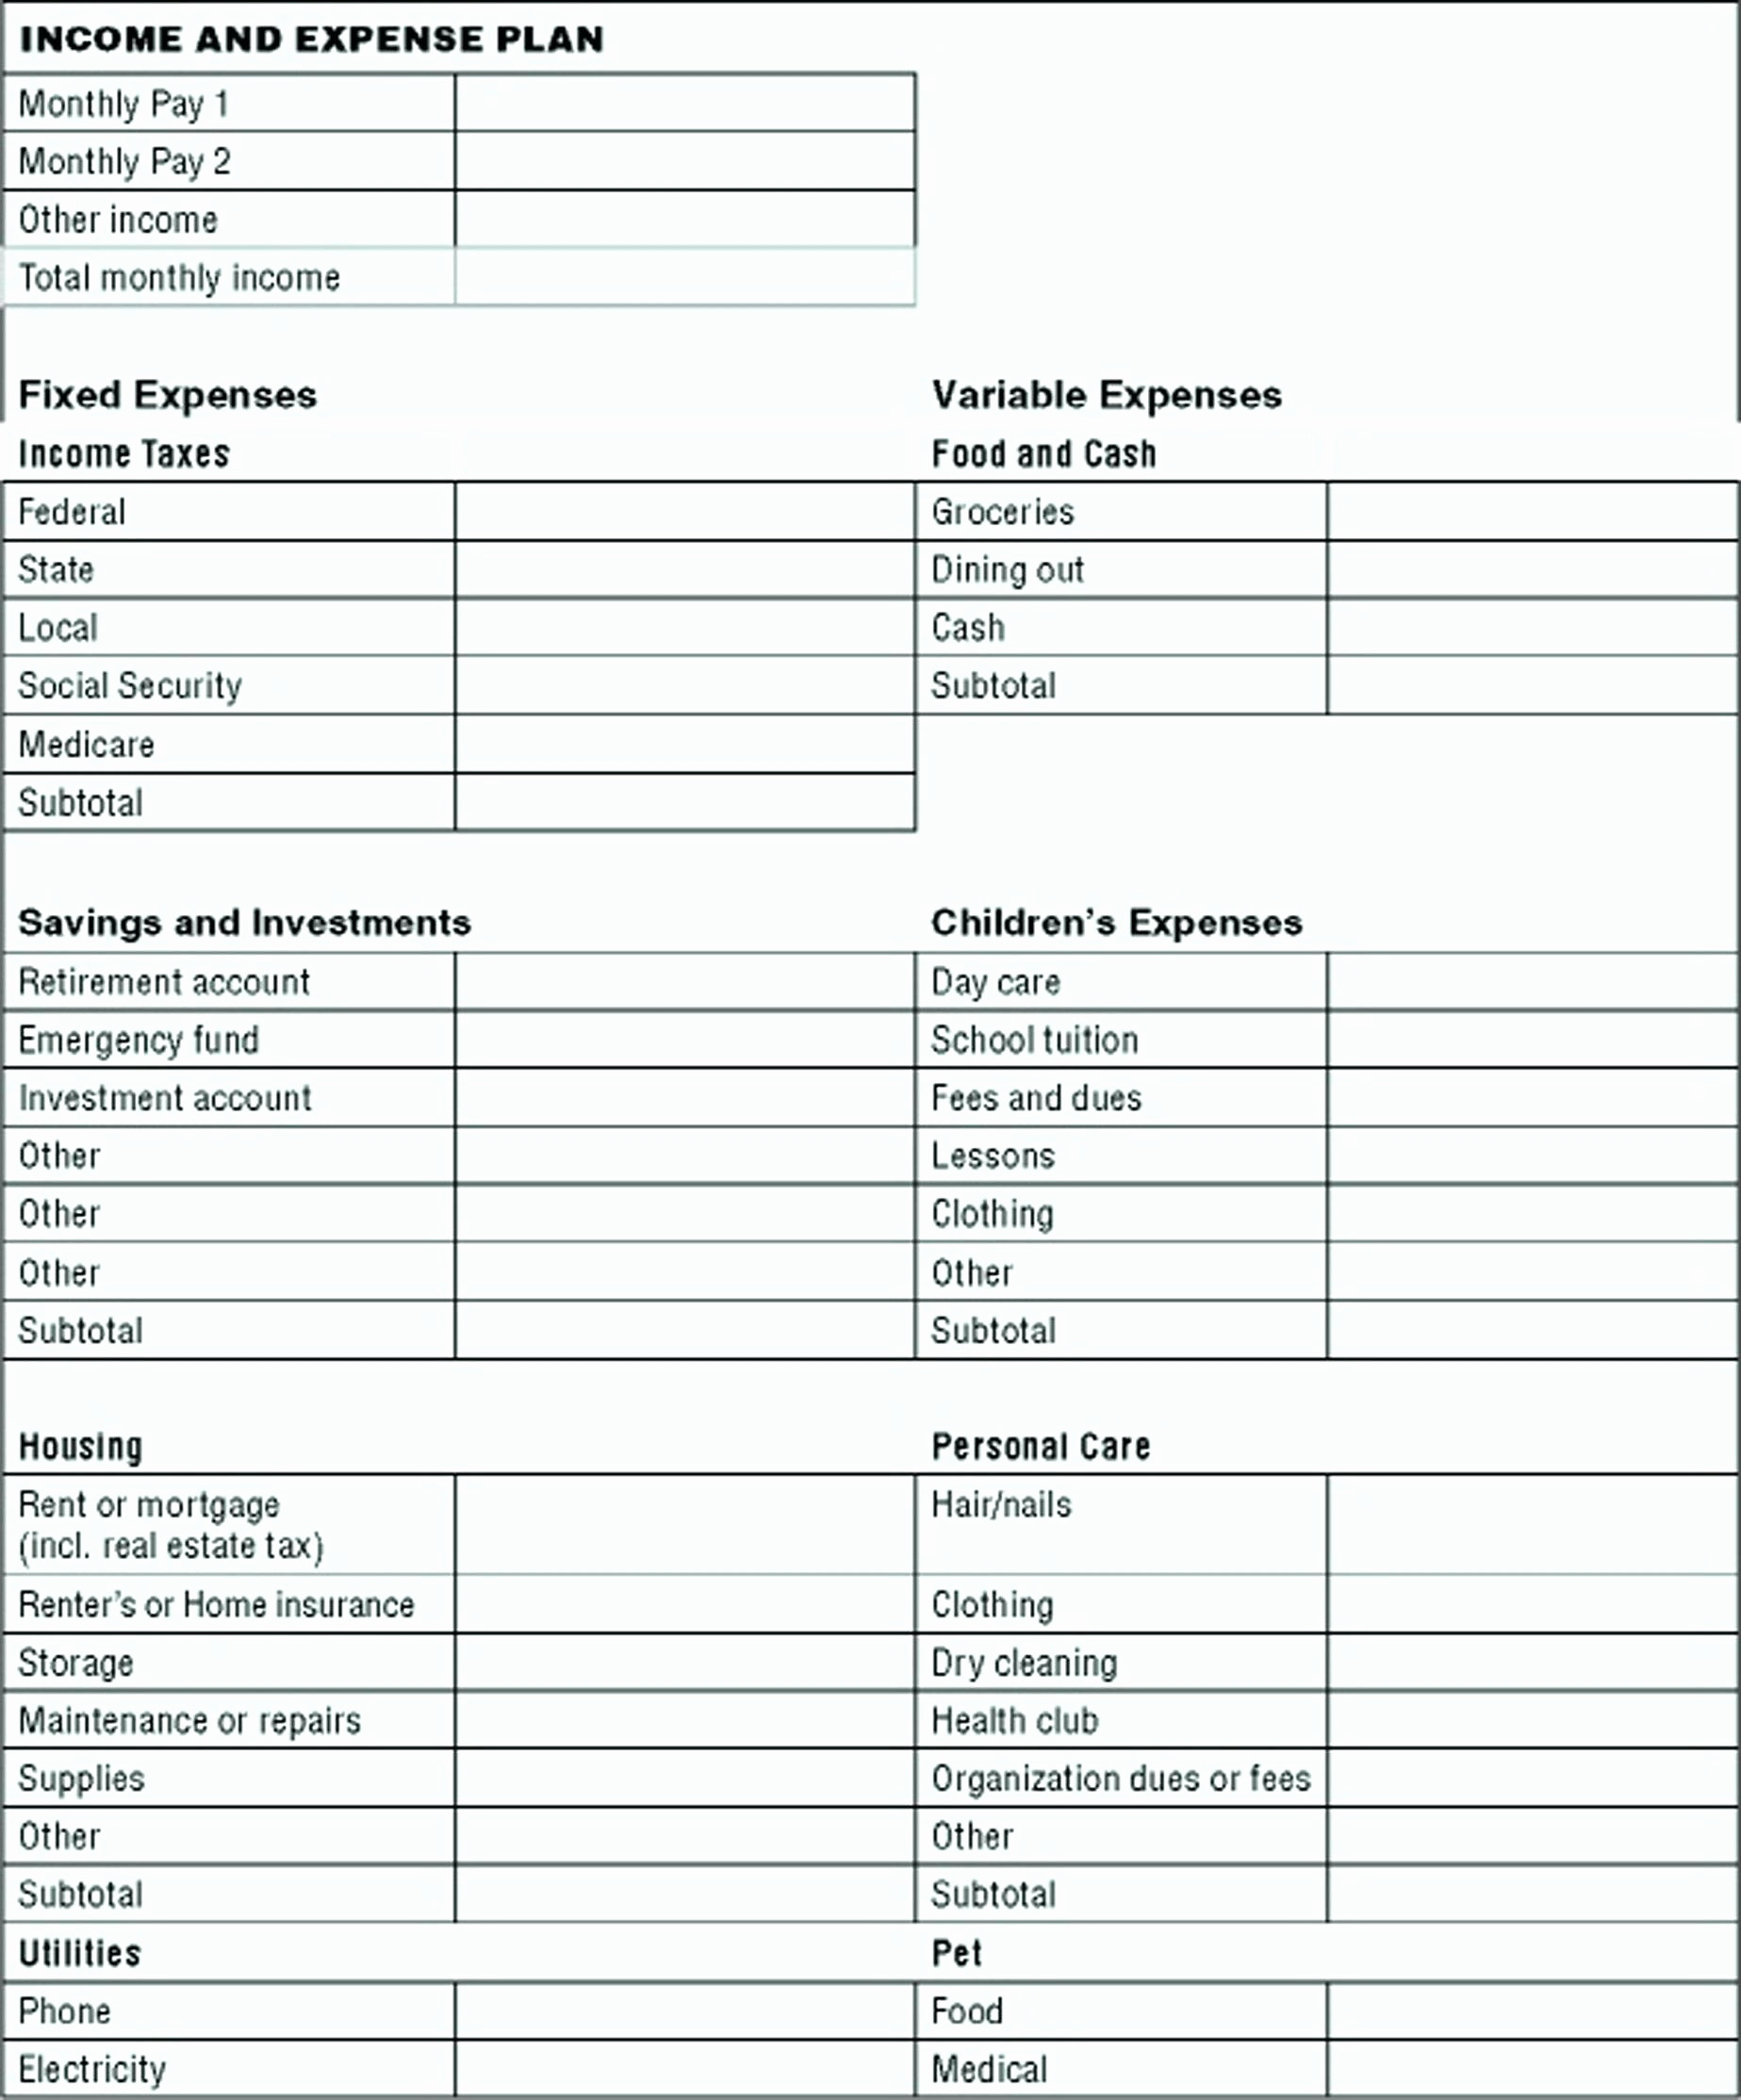 Rental Property Income And Expense Spreadsheet With Regard To Rental Property Income And Expense Spreadsheet – Spreadsheet Collections